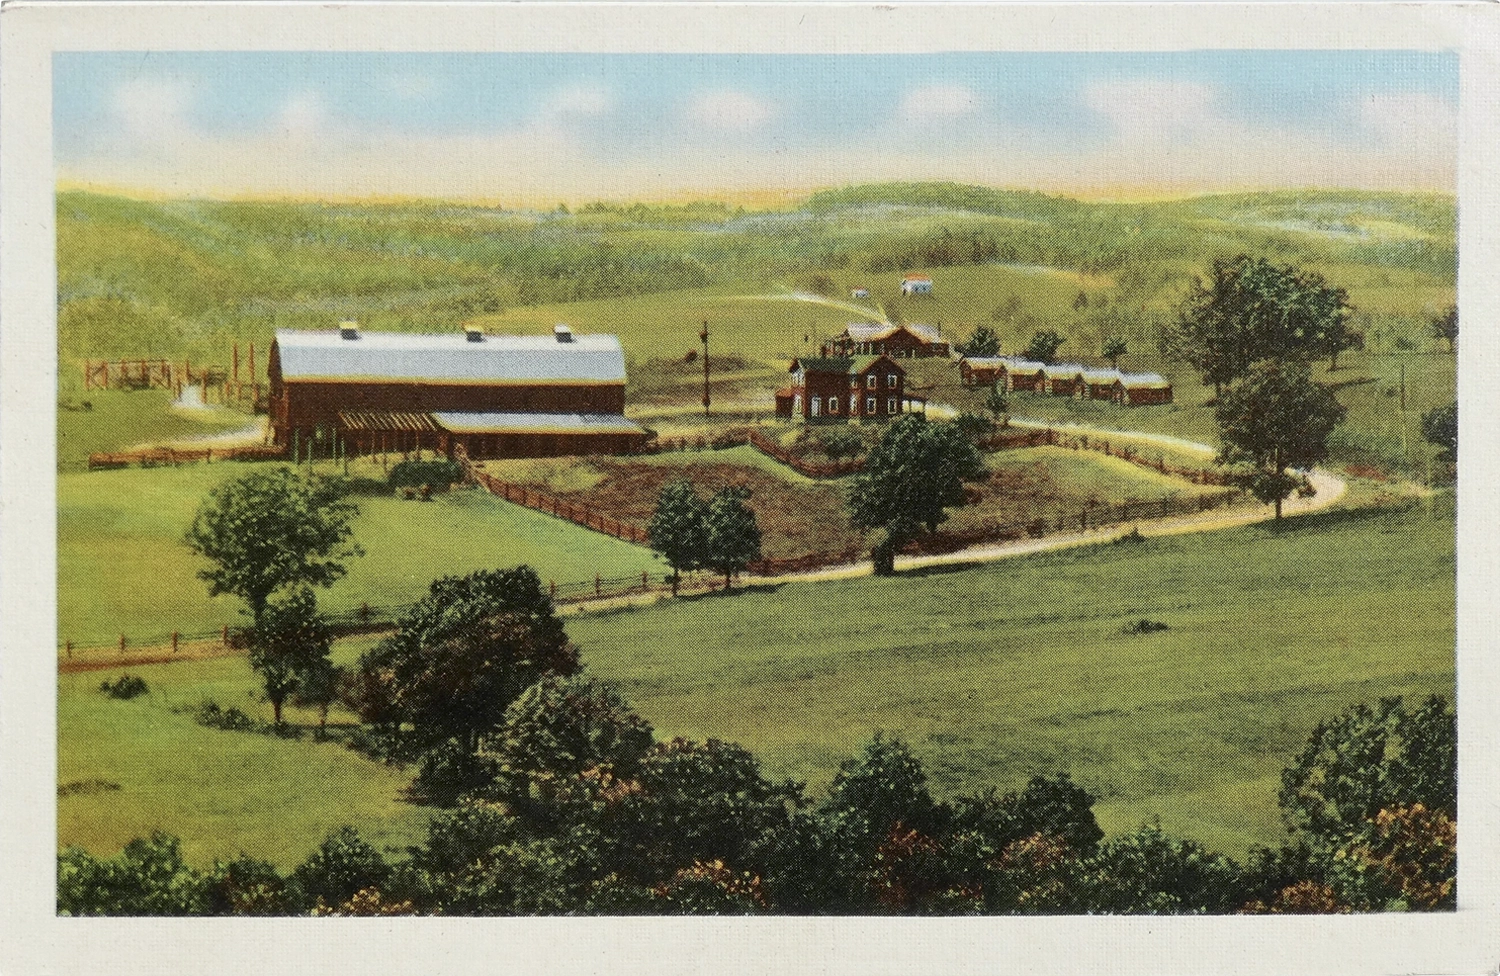 A farm consisting of a large red barn and several farm houses, all surrounded by lush green fields and forest.